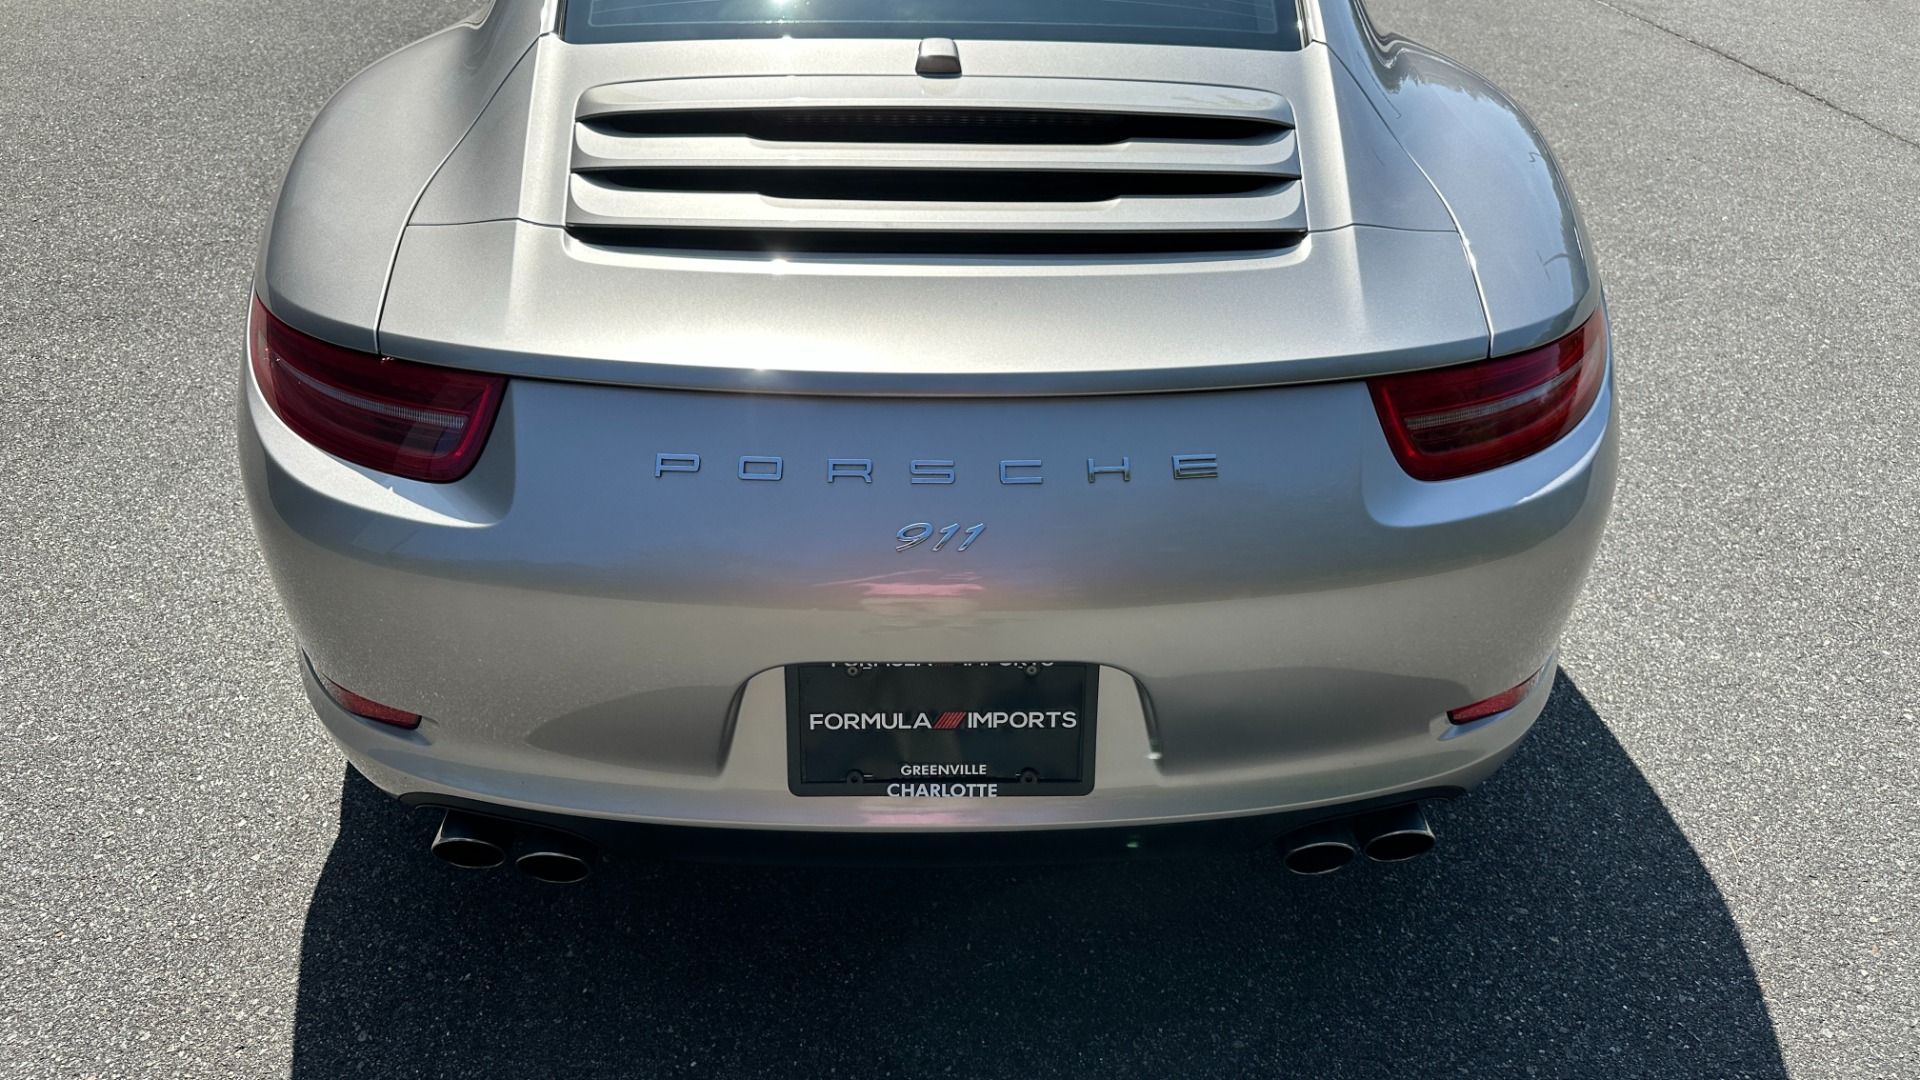 Used 2012 Porsche 911 991 CARRERA / PREMIUM PKG PLUS / SPORT EXHAUST / SPORT SEATS for sale Sold at Formula Imports in Charlotte NC 28227 9